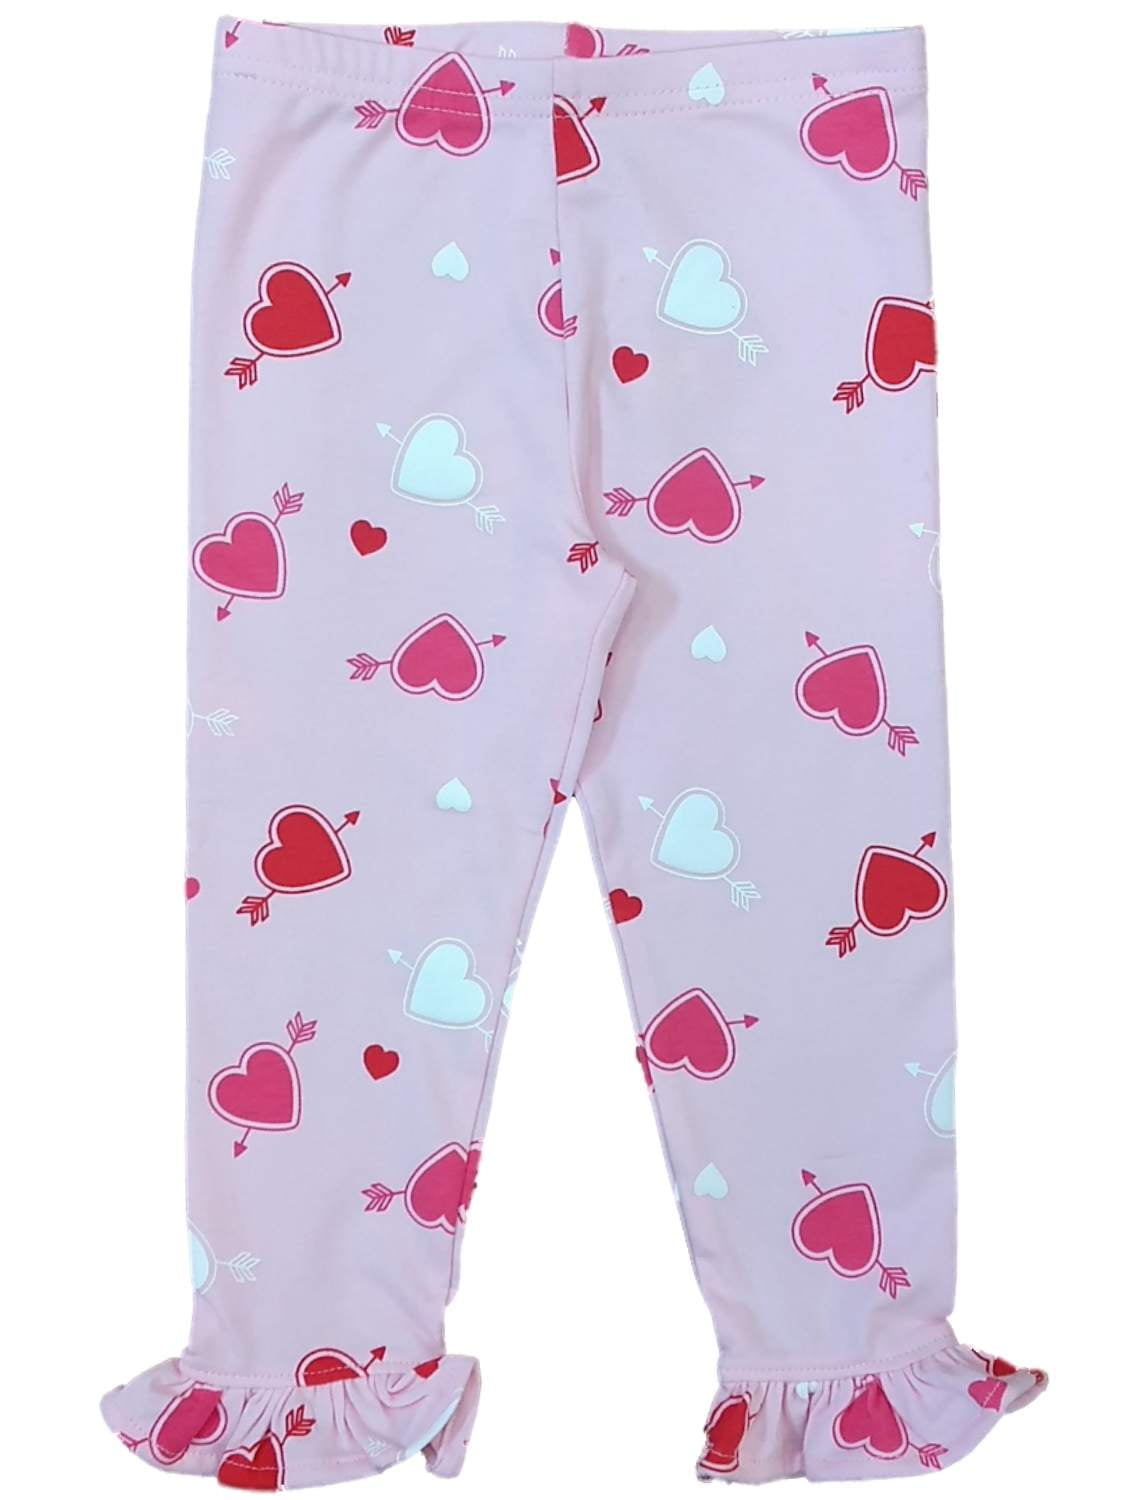 Official Merchandise Peppa Pig Rainbow Patterned Girls Leggings Twin Pack TV Cartoon Casual Bottoms Gift Idea for Girls